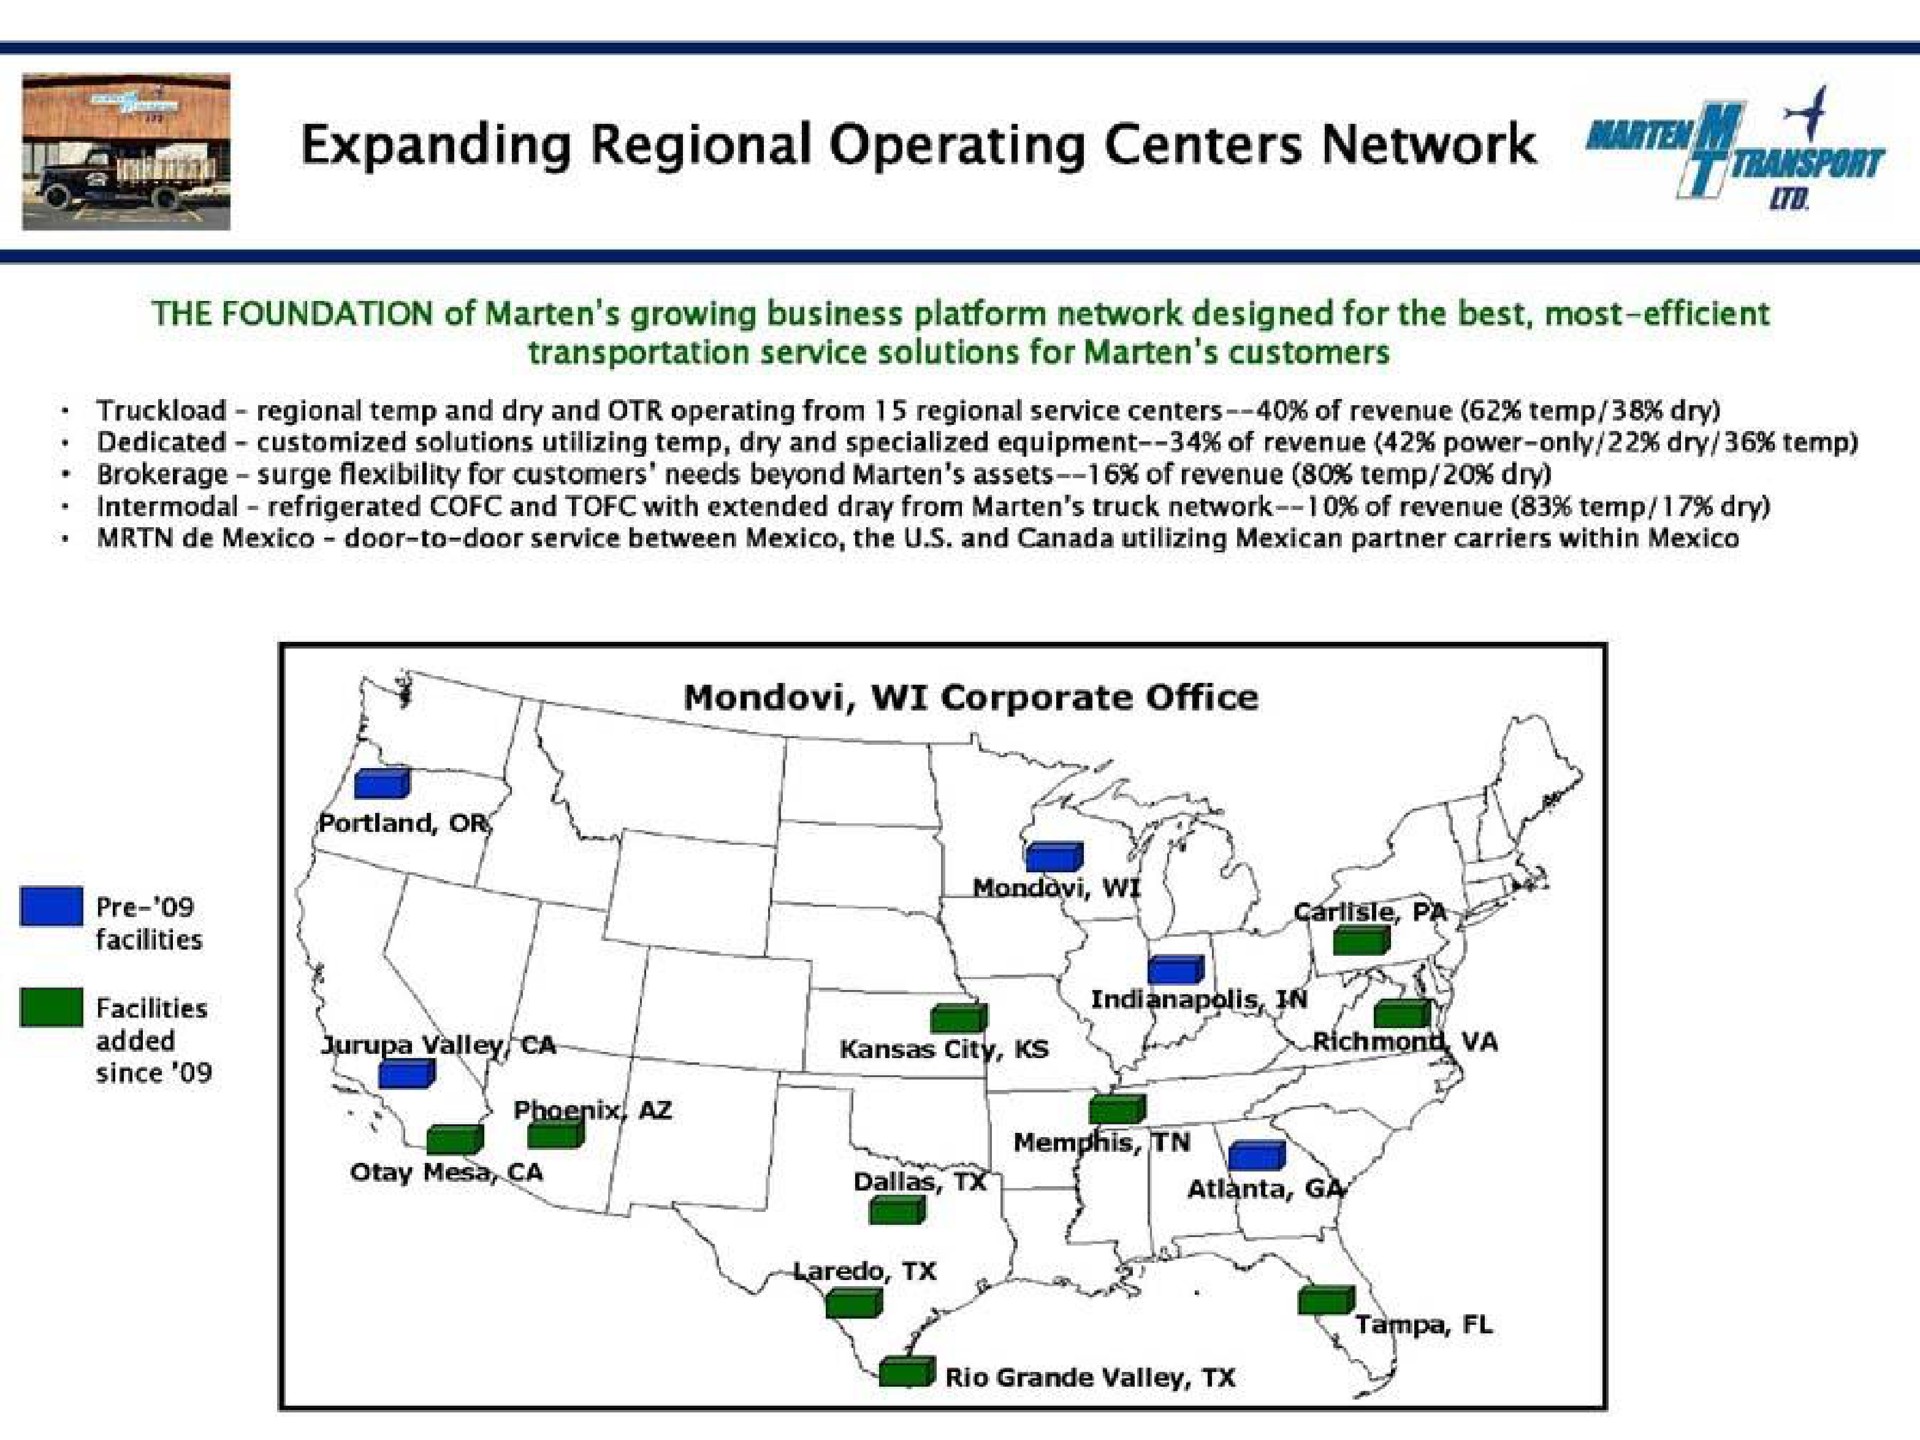 expanding regional operating centers network war psi corporate office foment to at me toa | Marten Transport